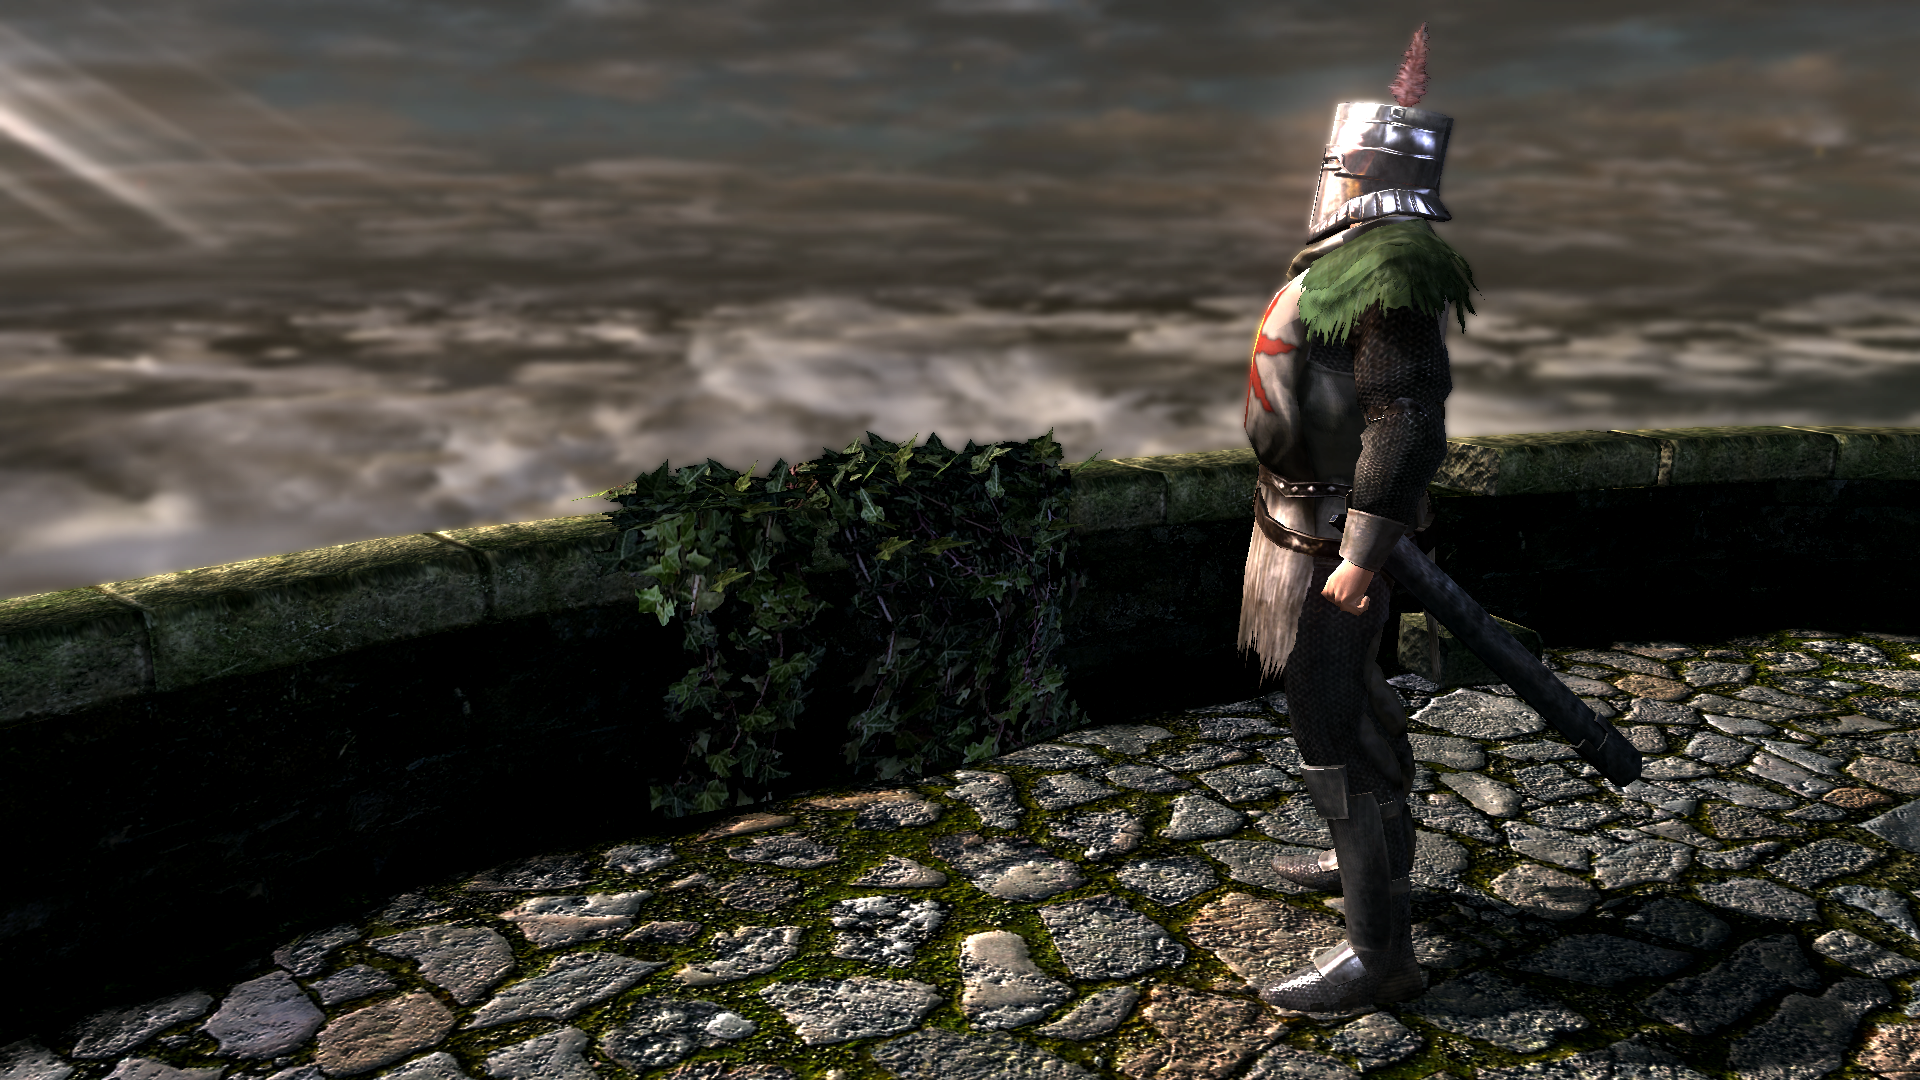 Solaire, the odd sun-worshipping knight in Dark Souls, stands facing towards the object of his affection on the edge of a stony paved area open to the sky